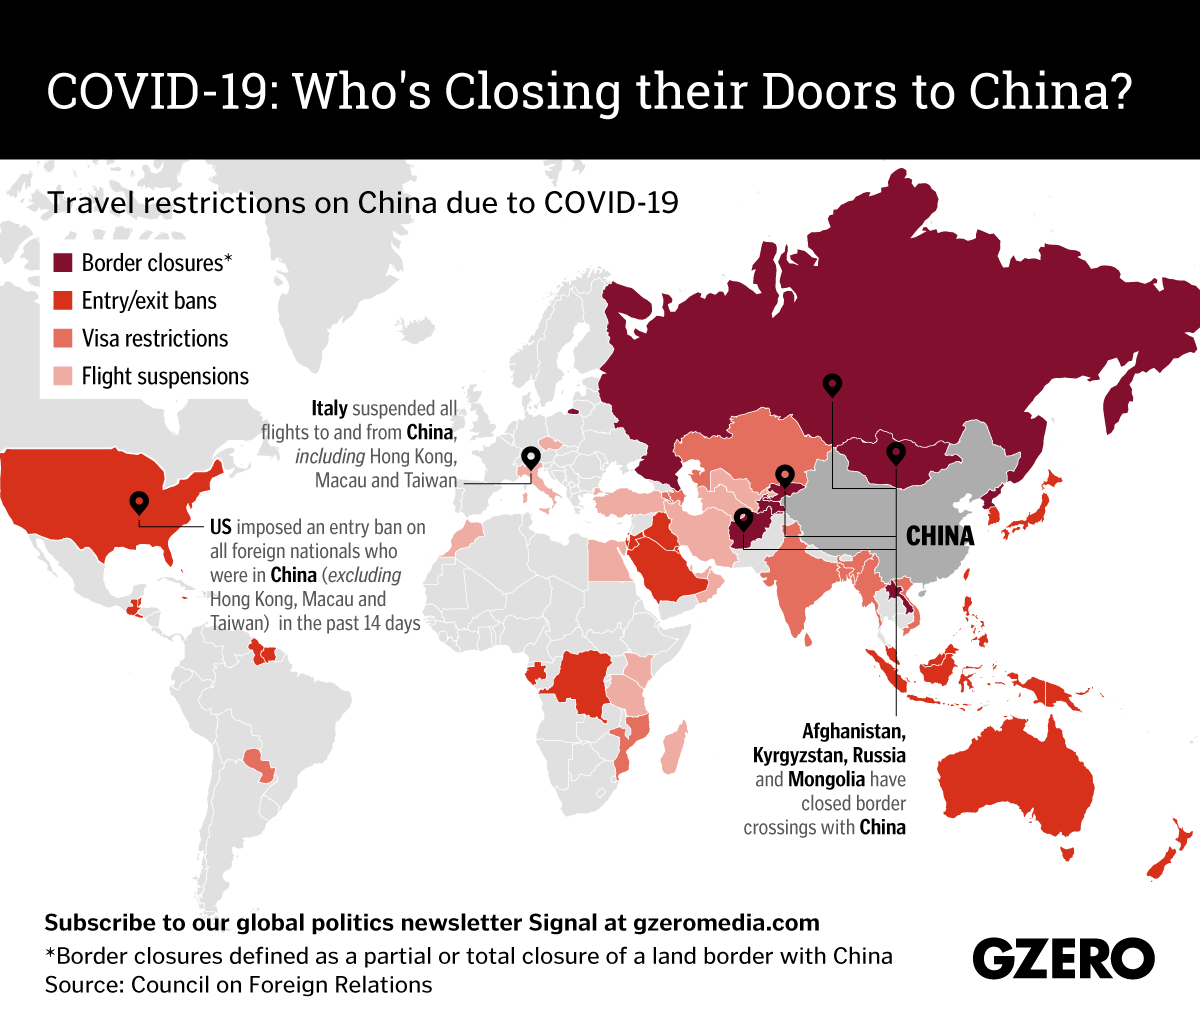 The Graphic Truth: Who's closing their doors to China due to COVID-19?